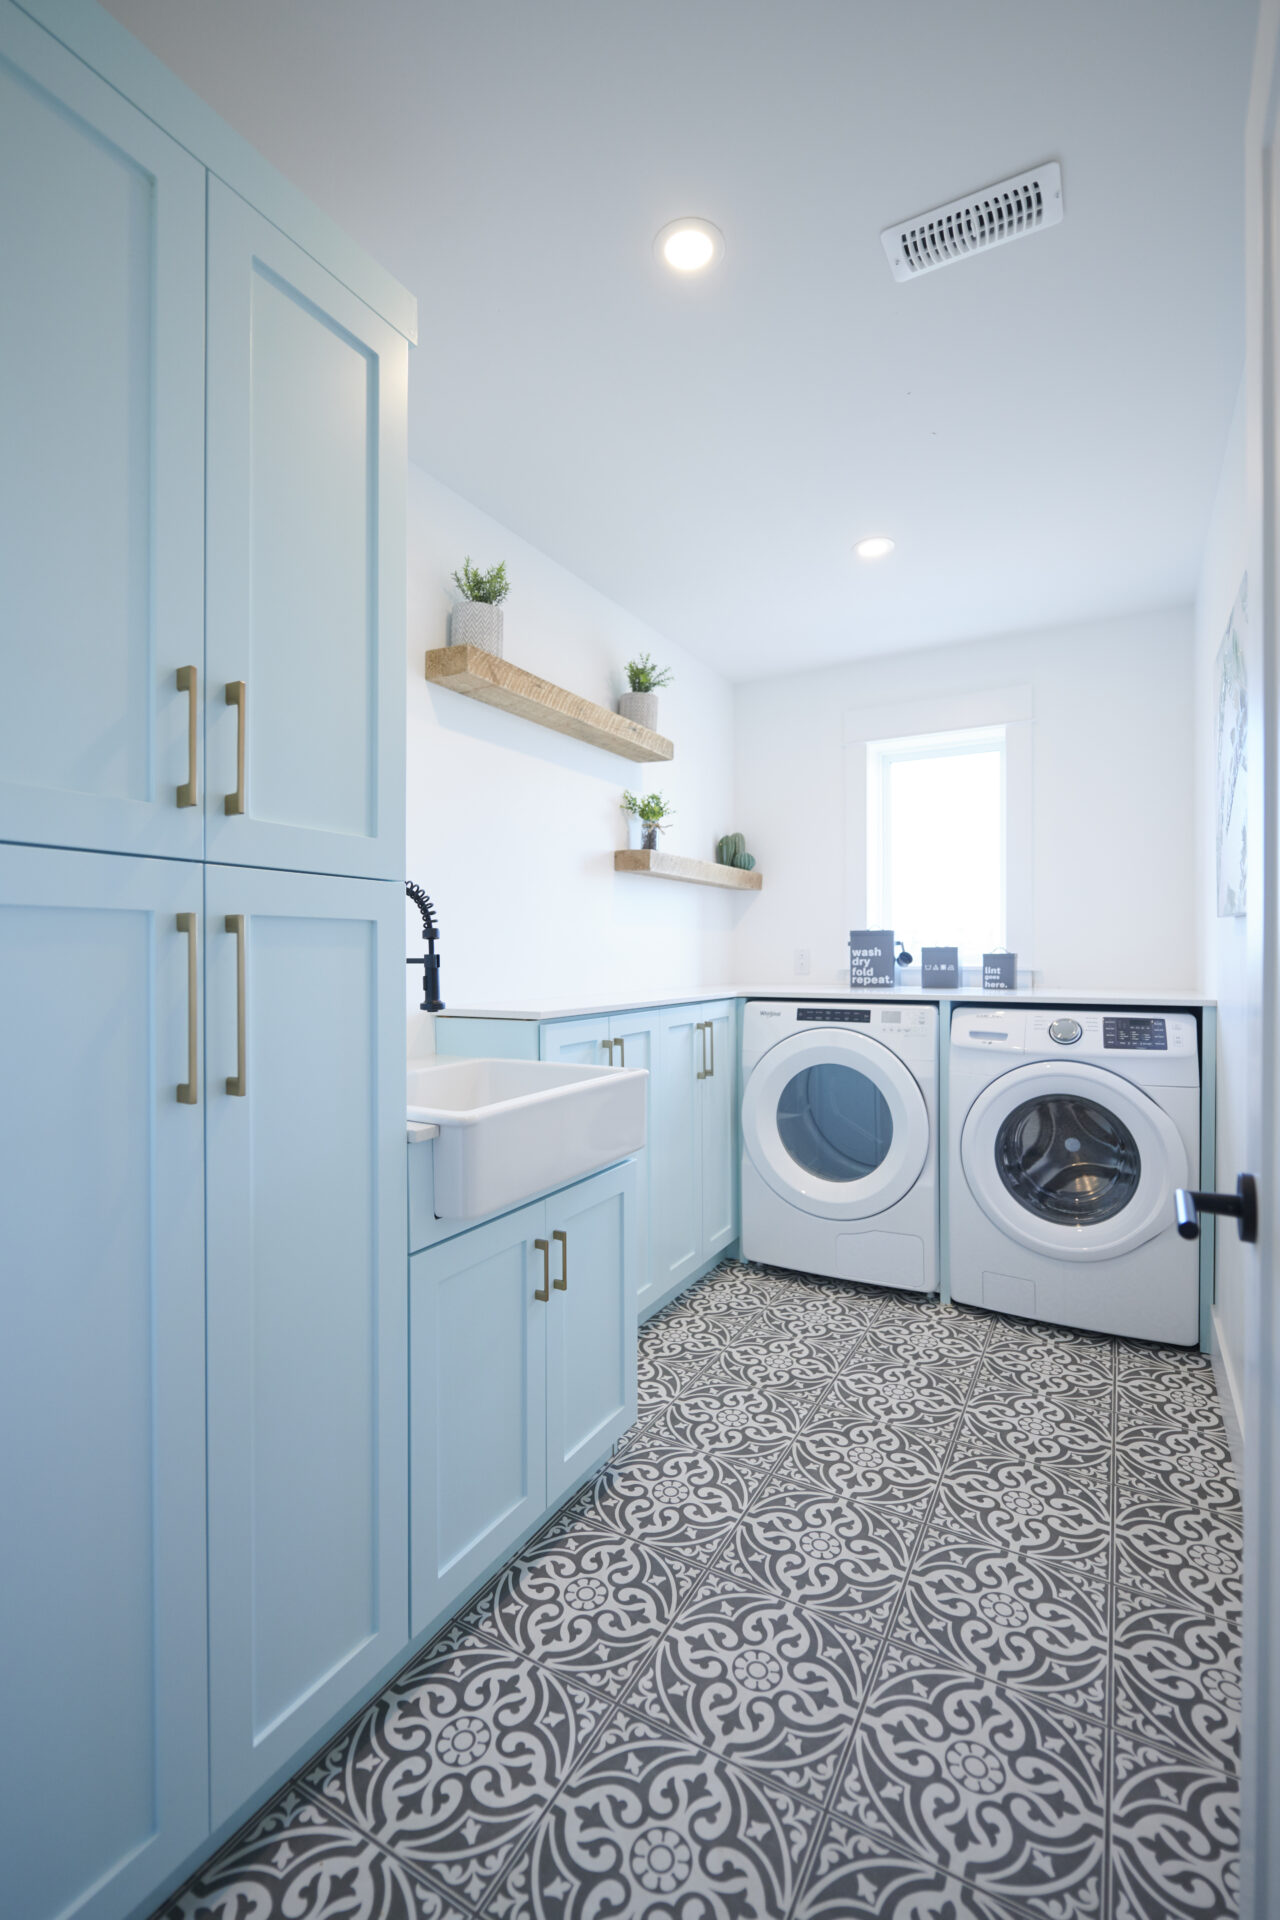 A bright laundry room with blue cabinetry, patterned floor tiles, a farmhouse sink, front-loading washer and dryer, and wooden shelves with plants.